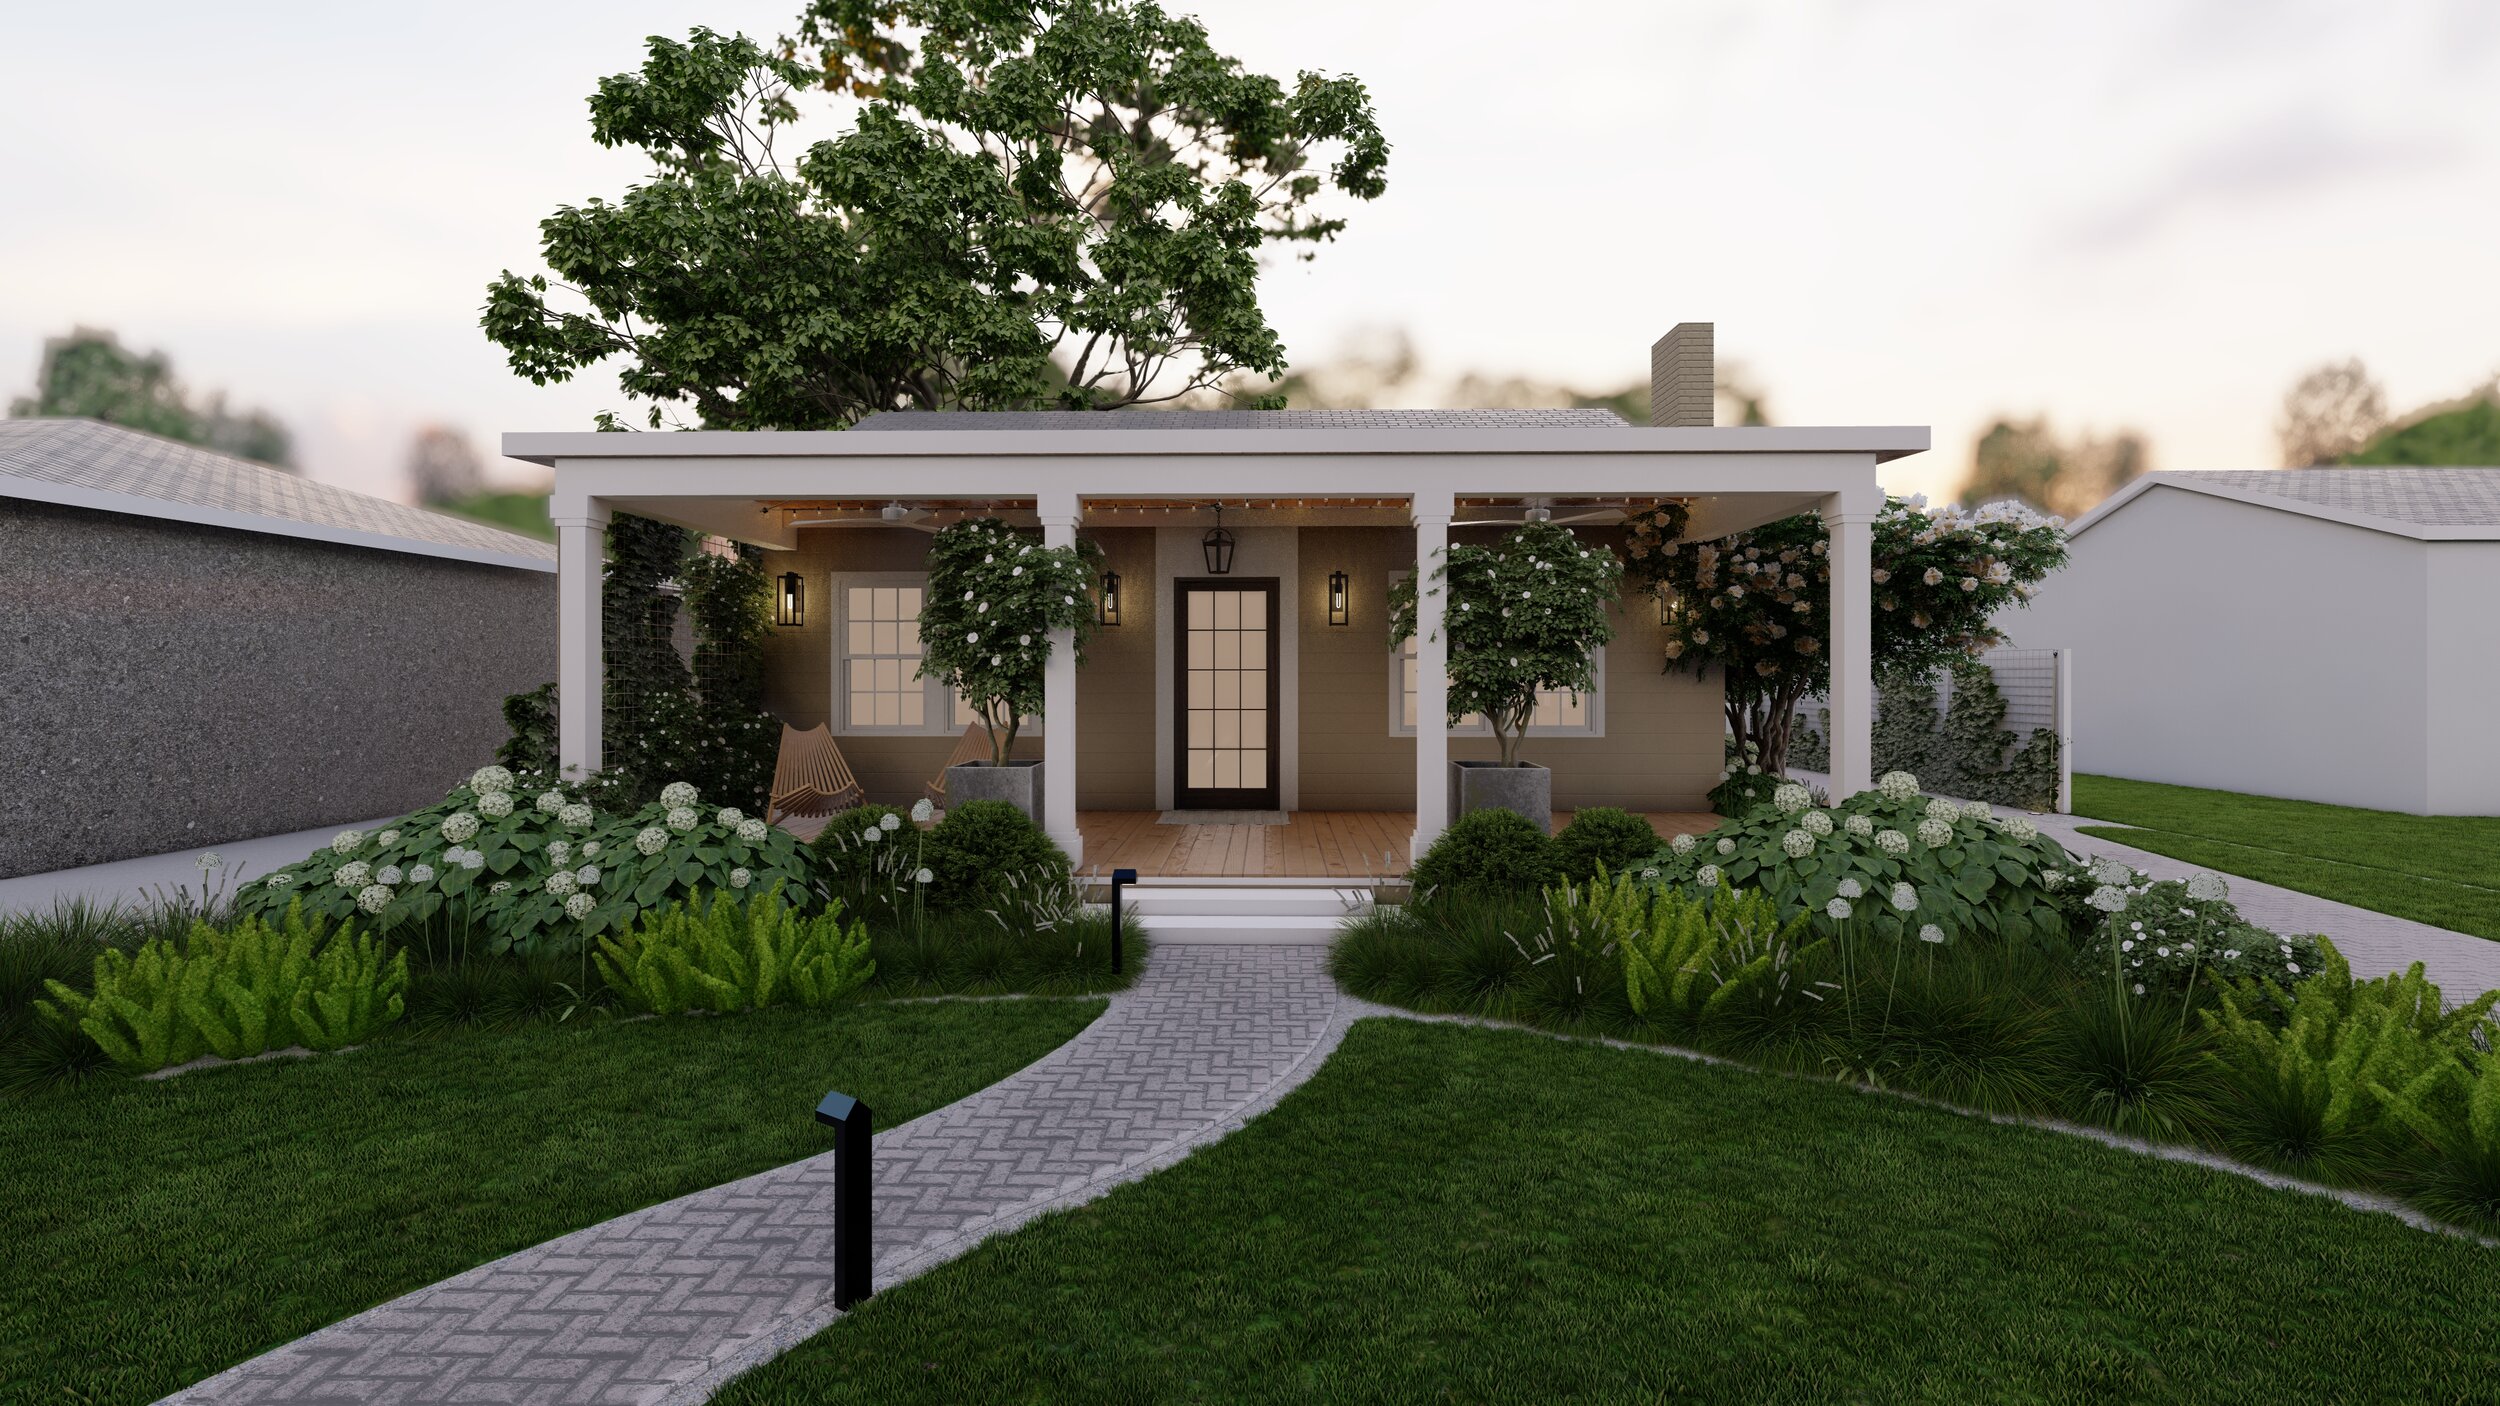 Straight on view of a small house with a porch and a covered patio surrounded by white flowering plants with herringbone pathway